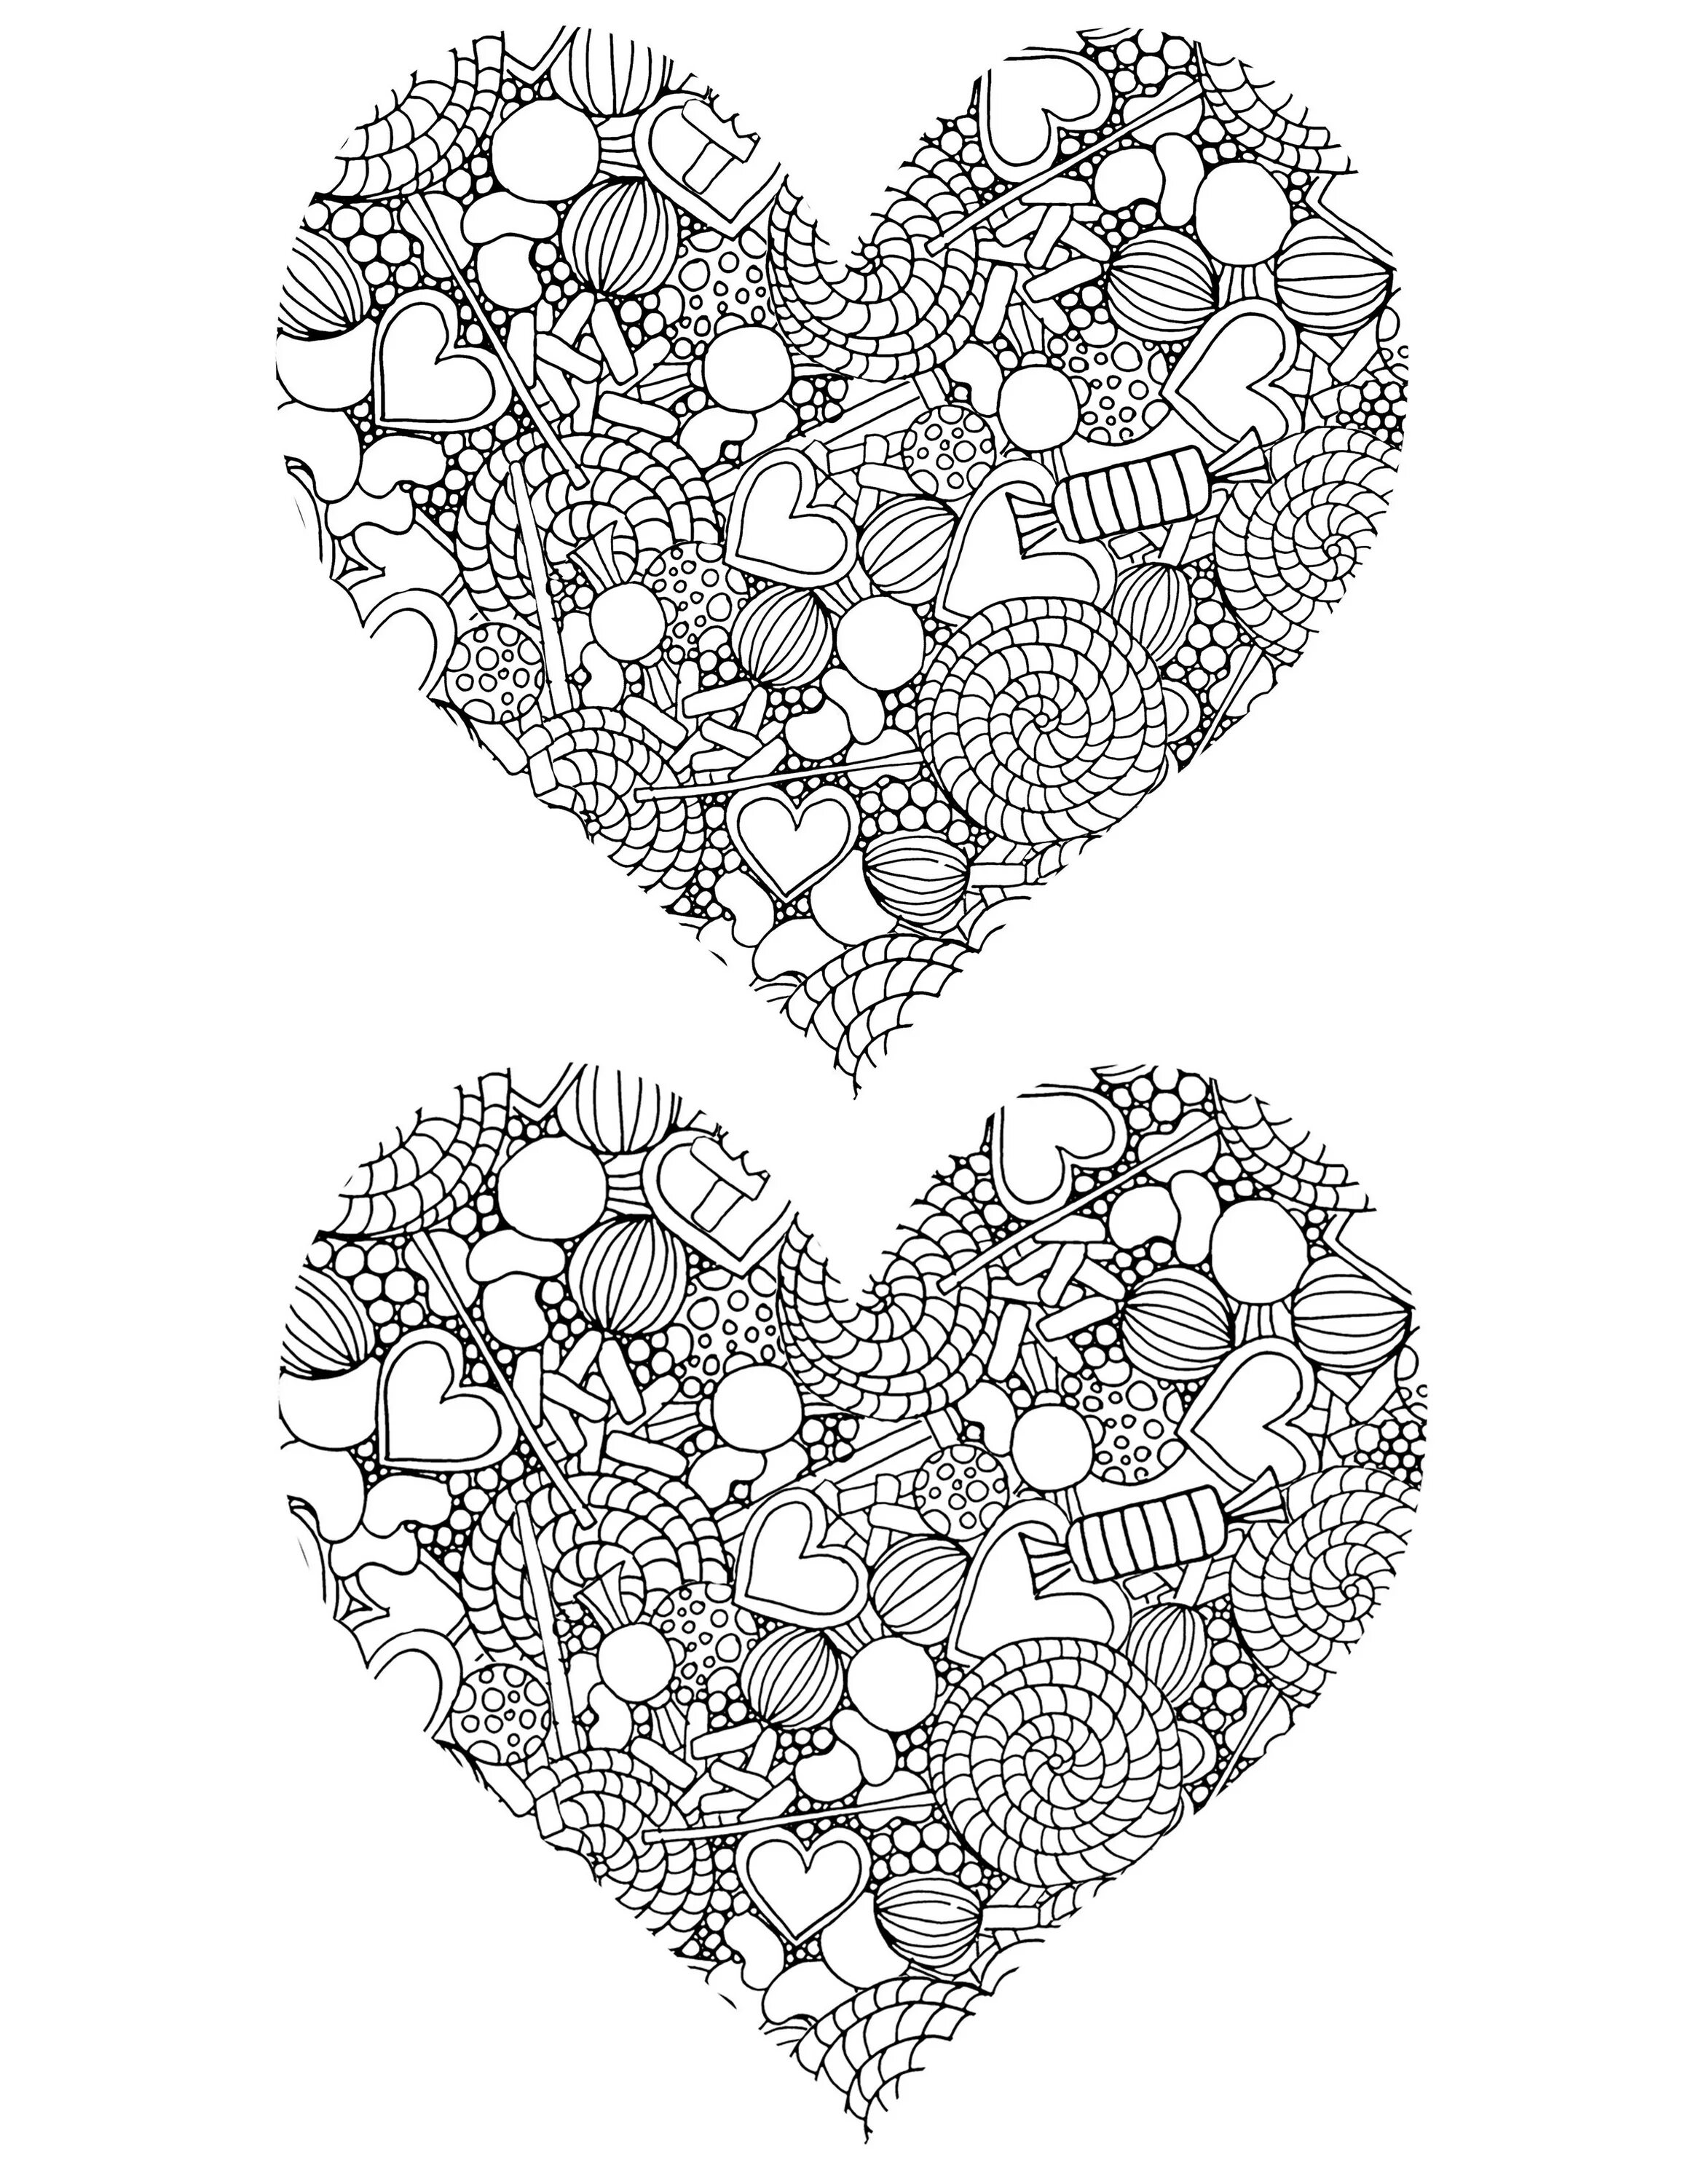 Heart love antistress coloring book